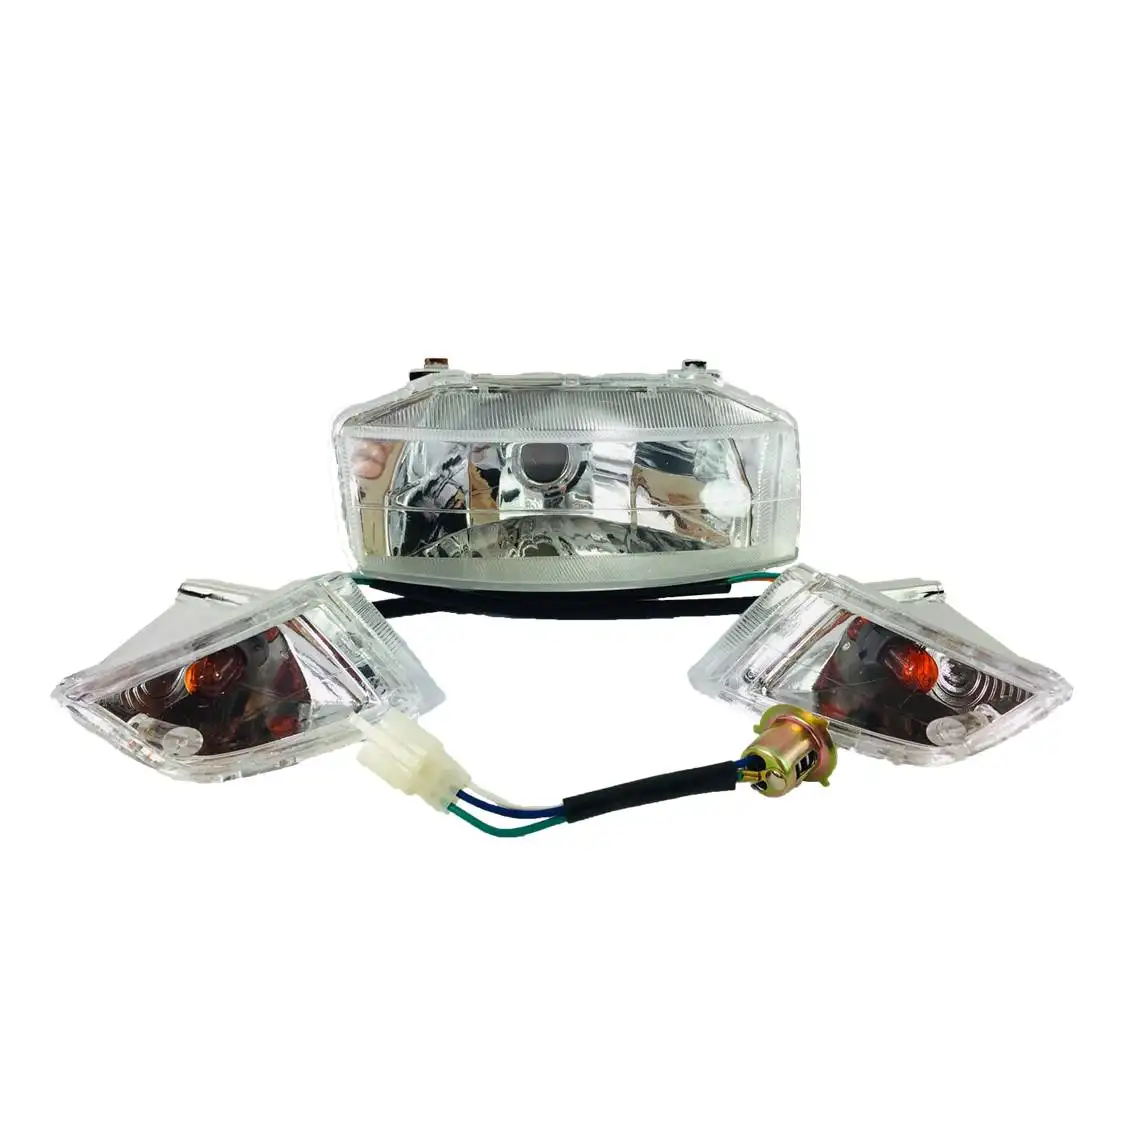 TWH DIO Scooter motorcycle headlight assembly for Honda DIO